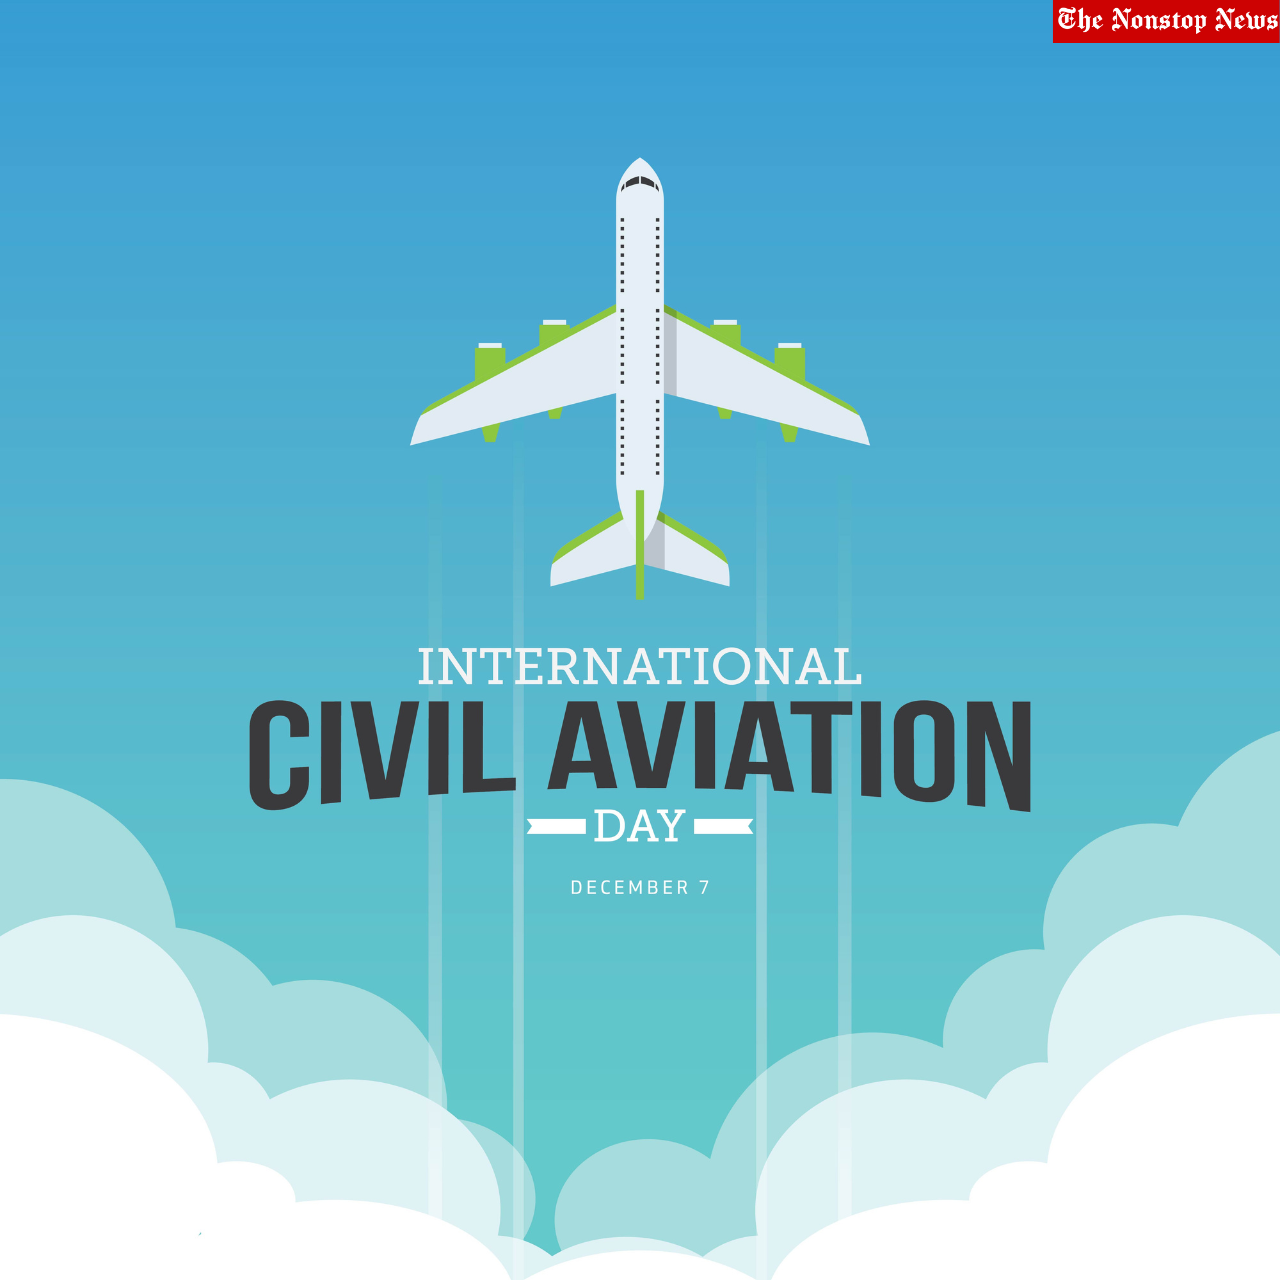 International Civil Aviation Day 2022 Wishes, Posters, Images, Greetings, Messages, Quotes, Banners, and Captions